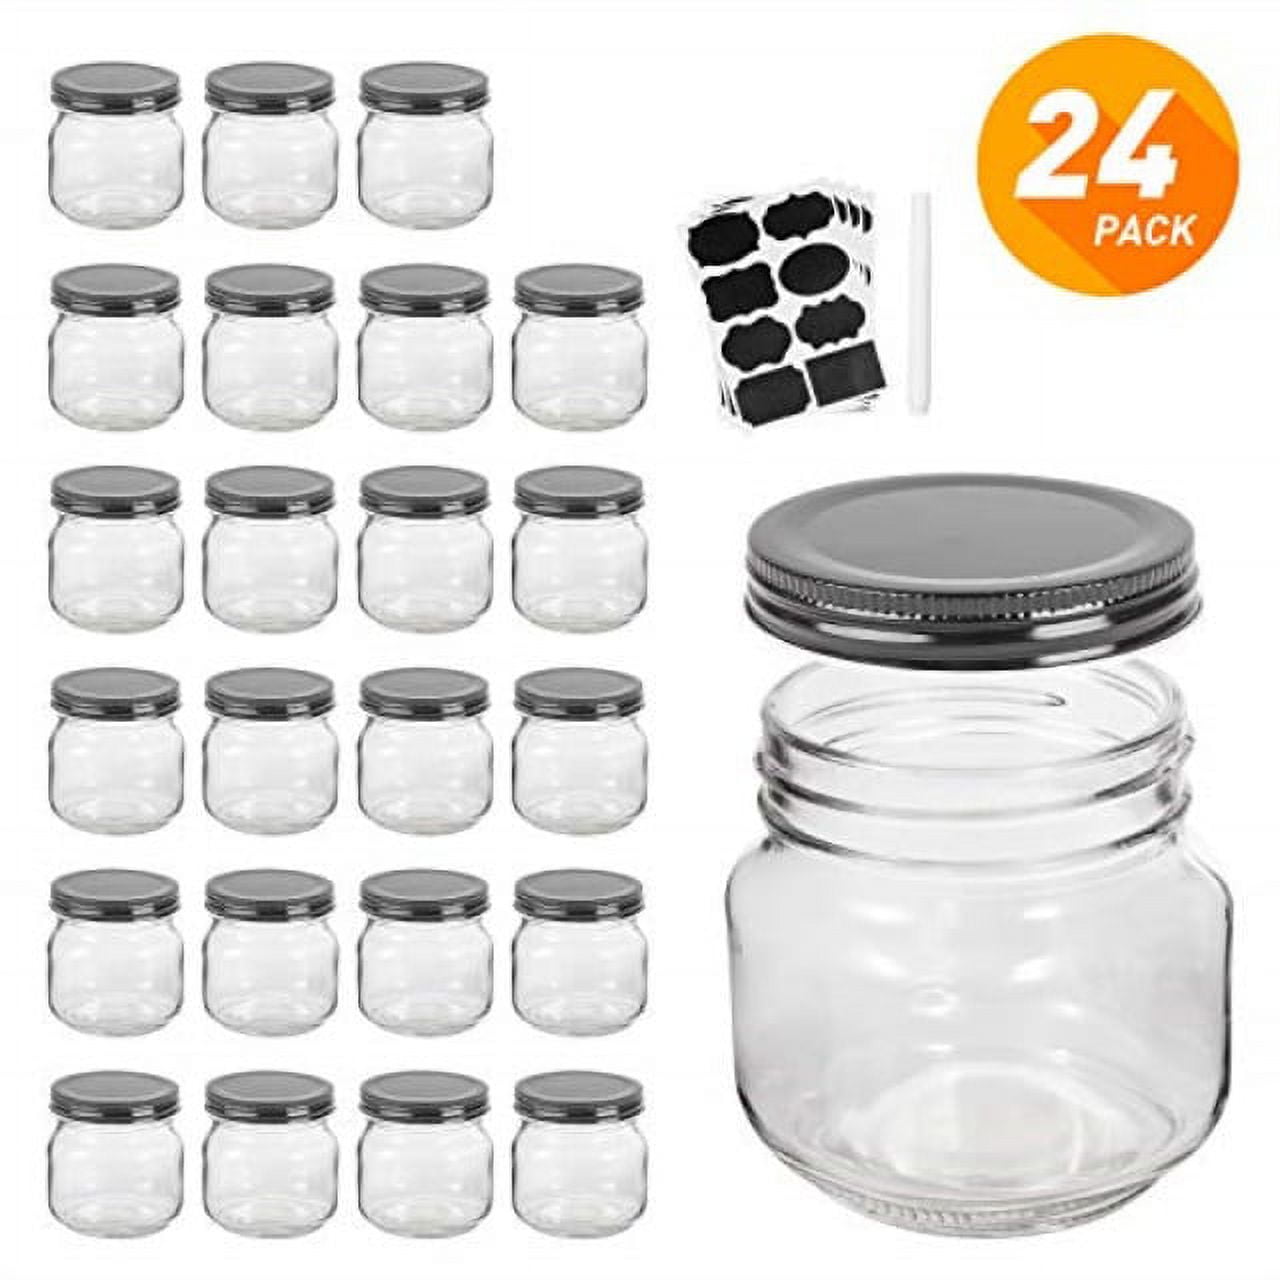 QAPPDA Mason Jars,Glass Jars With Lids 8 oz,Canning Jars For Pickles And  Kitchen Storage,Wide Mouth Spice Jars With Black Lids For  Honey,Caviar,Herb,Jelly,Jams,…